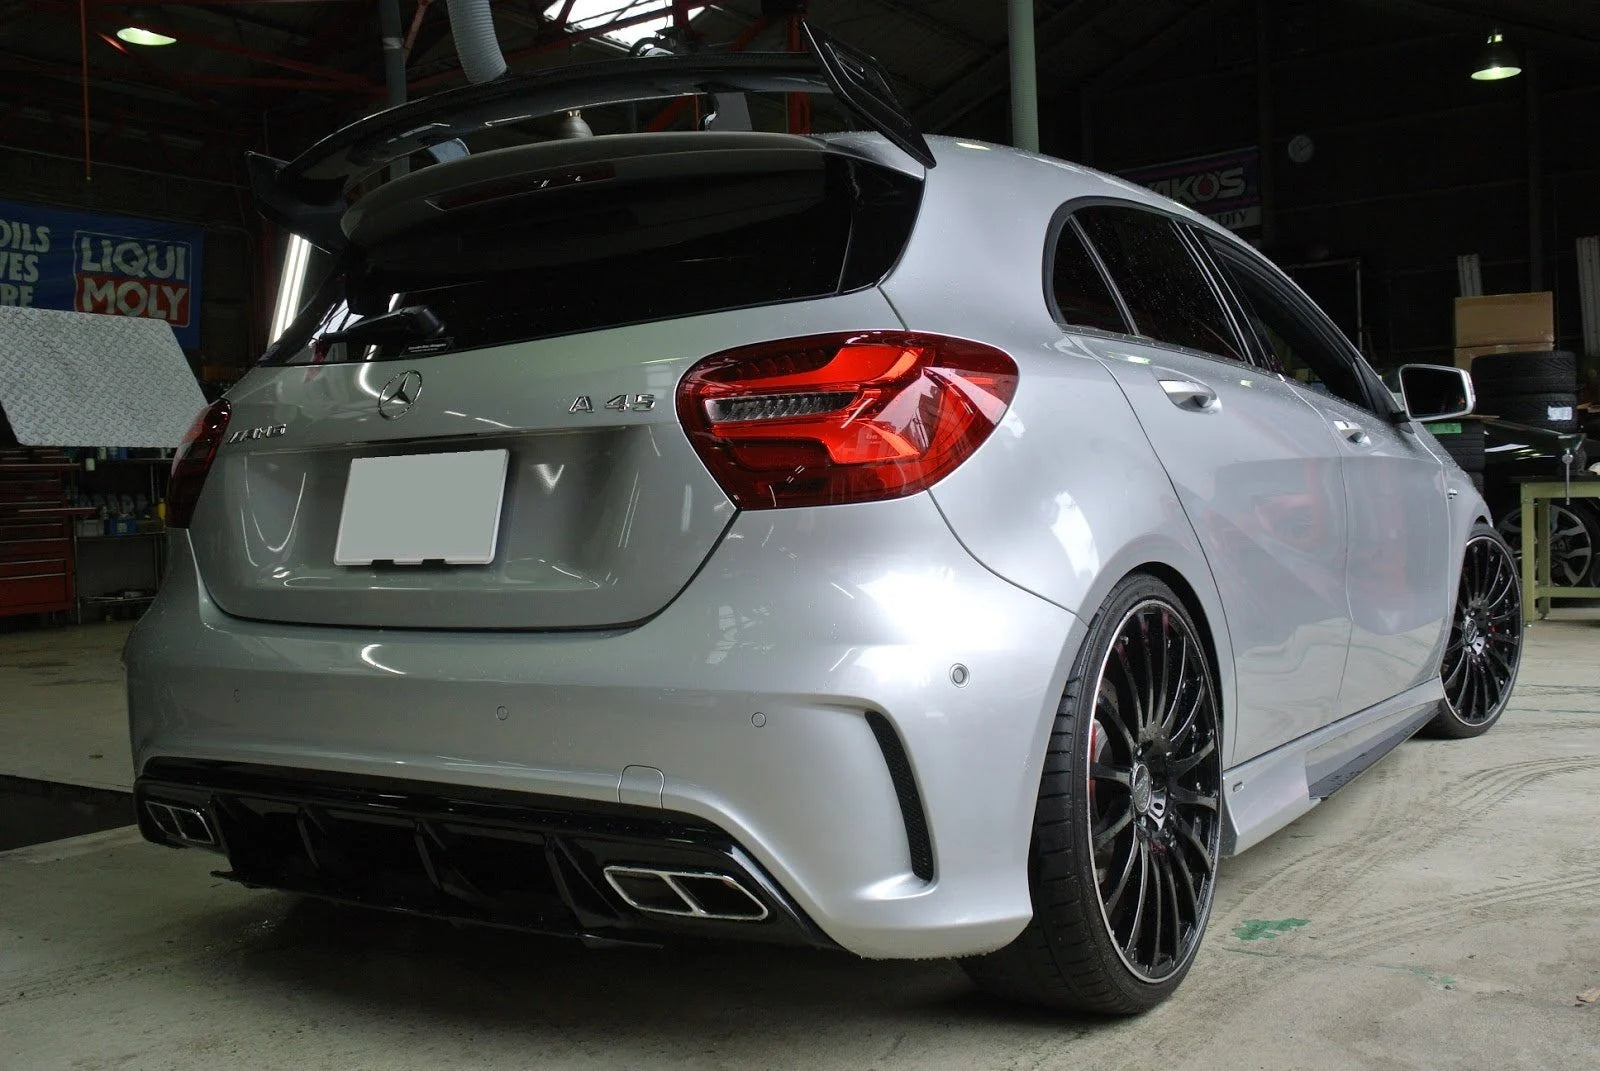 Exon Gloss Black Rear Diffuser Kit A45 AMG Style for Mercedes Benz A200 A250 Sport W176 (2013-2018) - MODE Auto Concepts